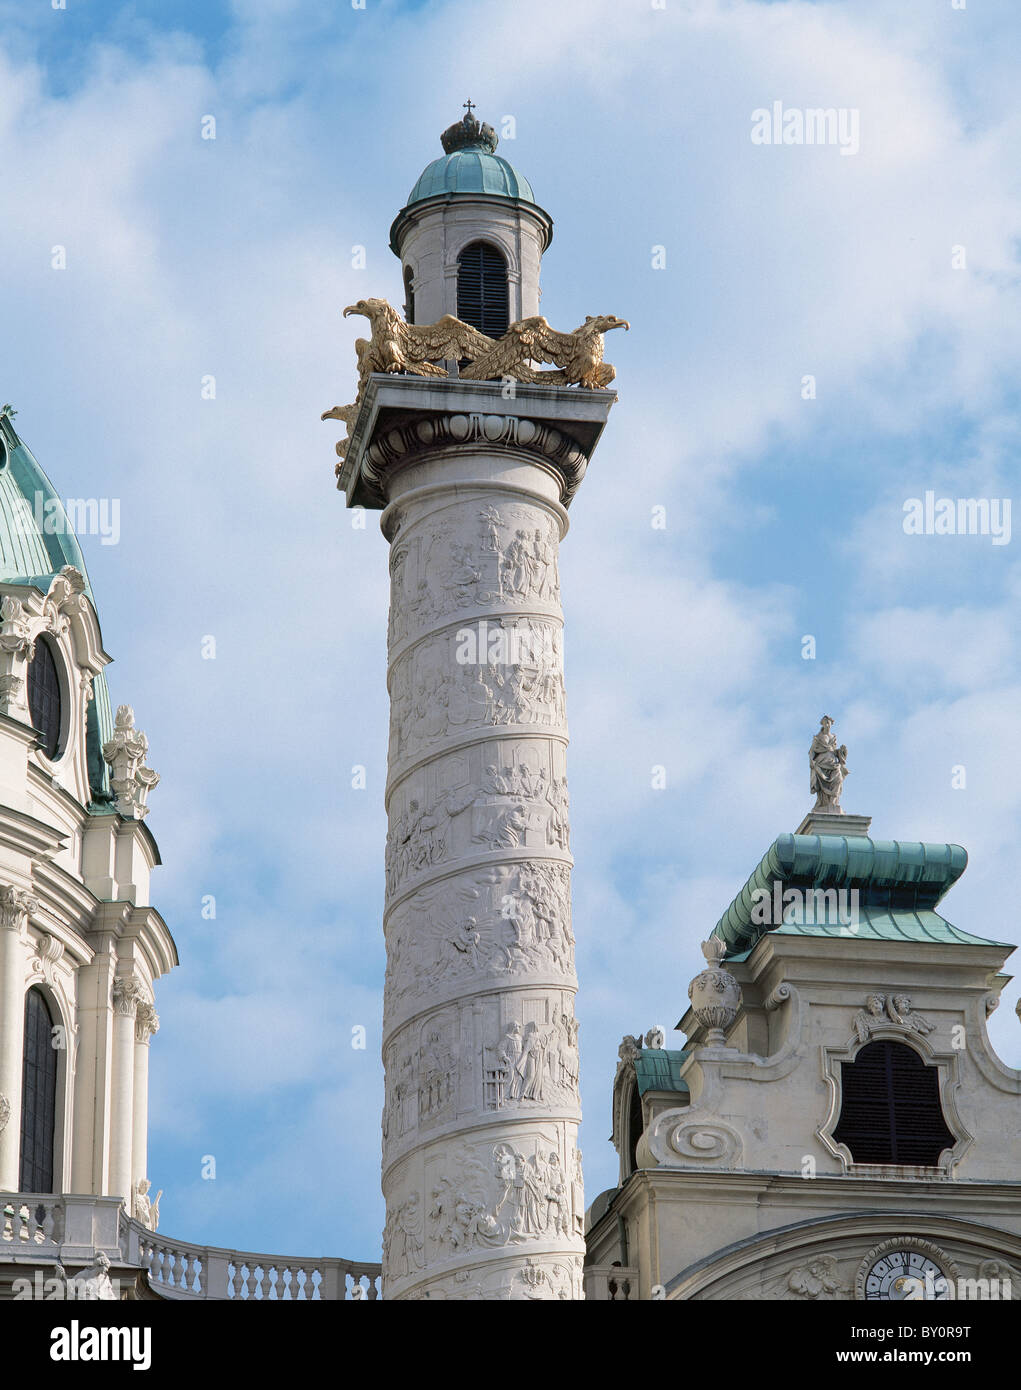 Karlskirche. Column on the right side of the church depicting scenes from the life of St. Charles Borromeo. Vienna. Austria. Stock Photo